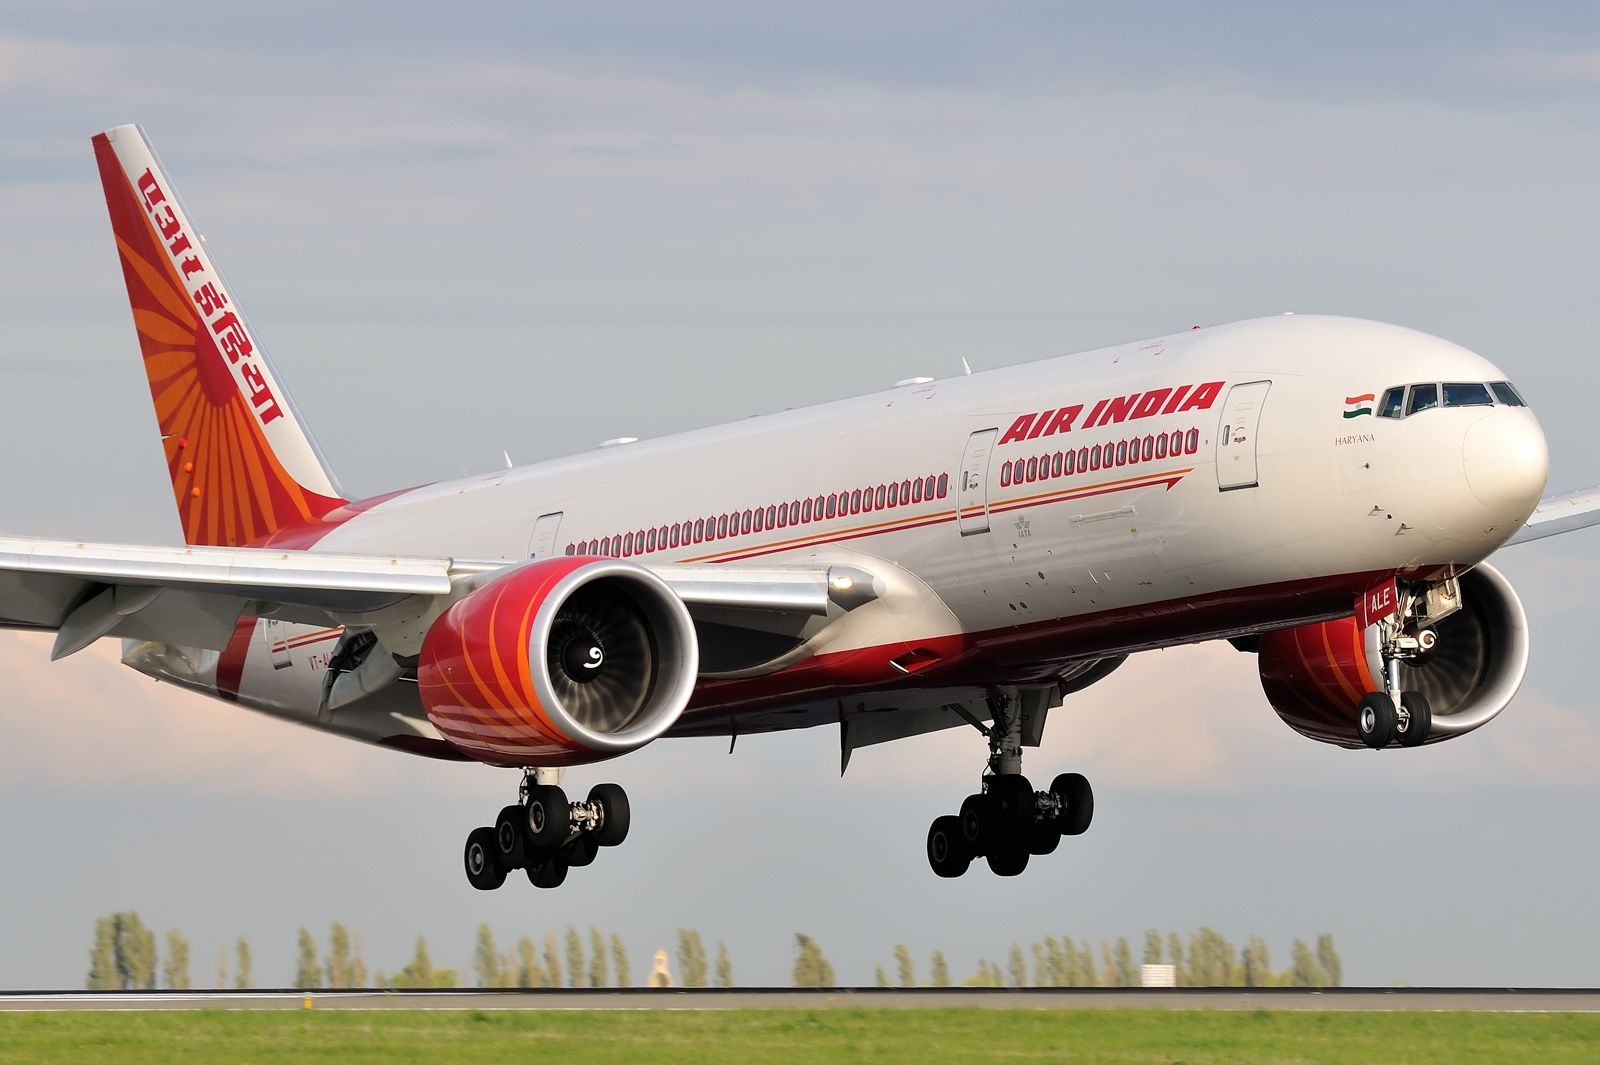 Boeing 777 200 Of Air India Takeoff Aircraft Wallpaper 3193